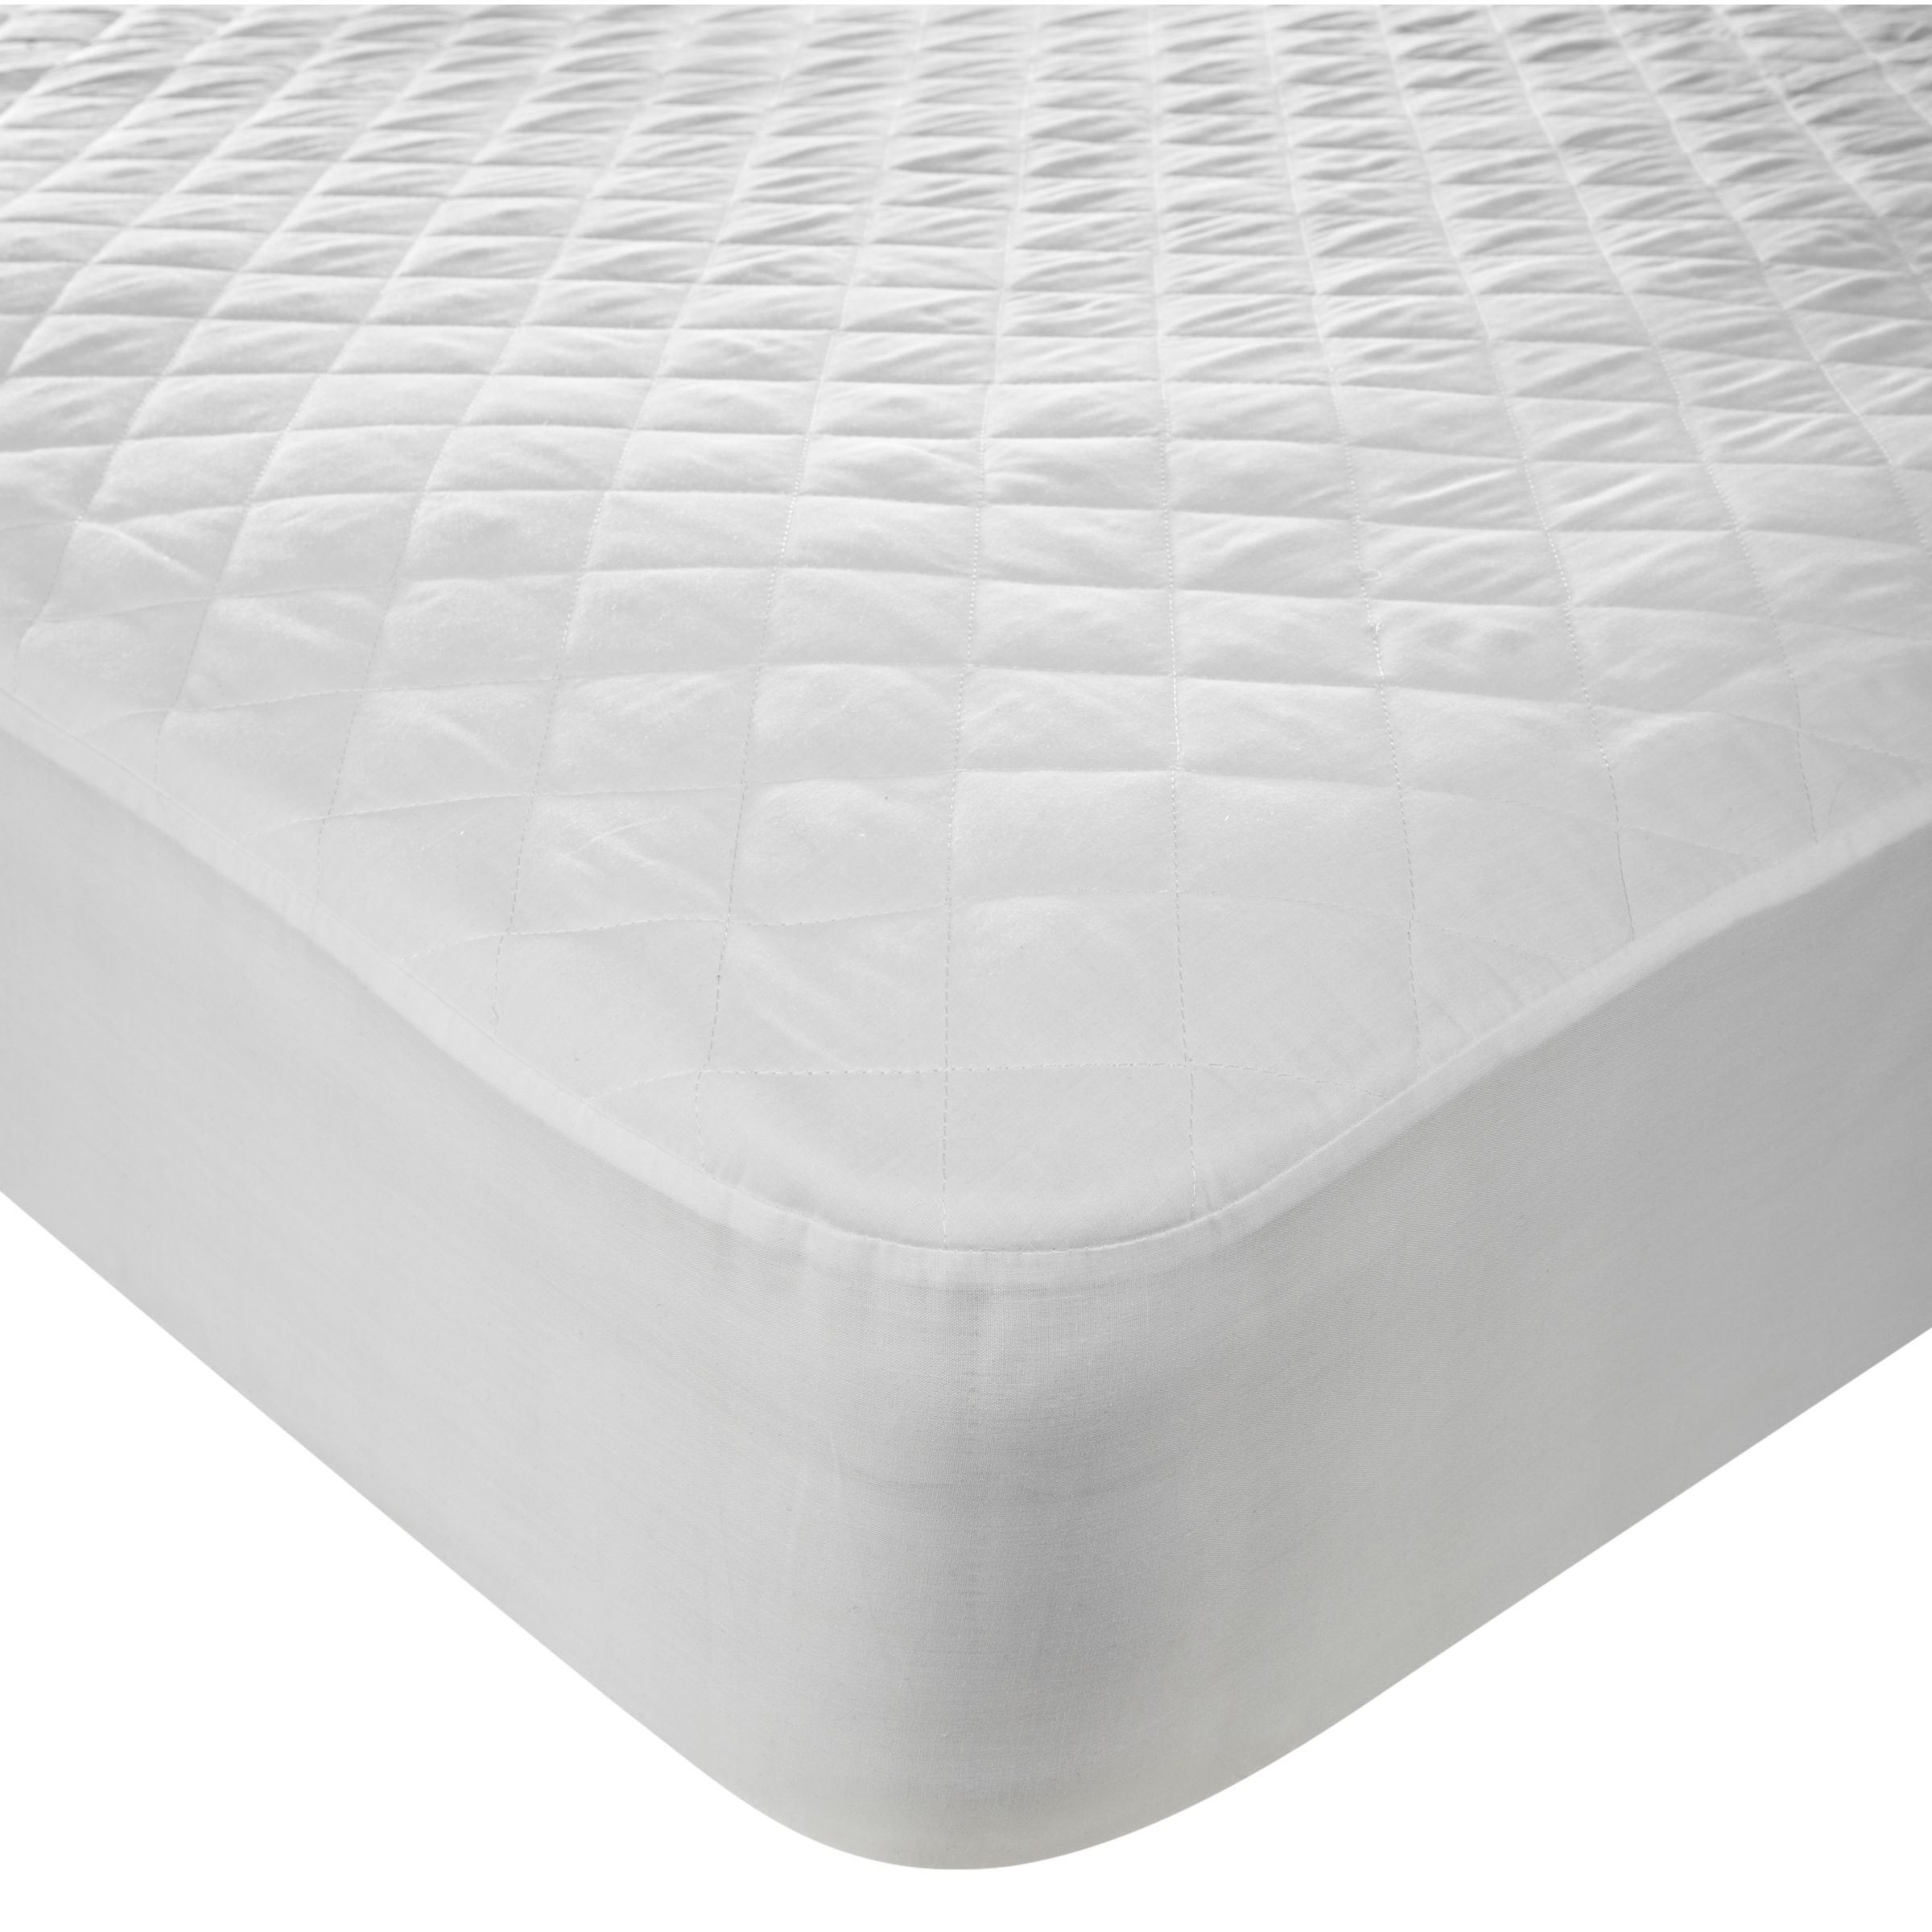 John Lewis Value Polycotton Quilted Mattress